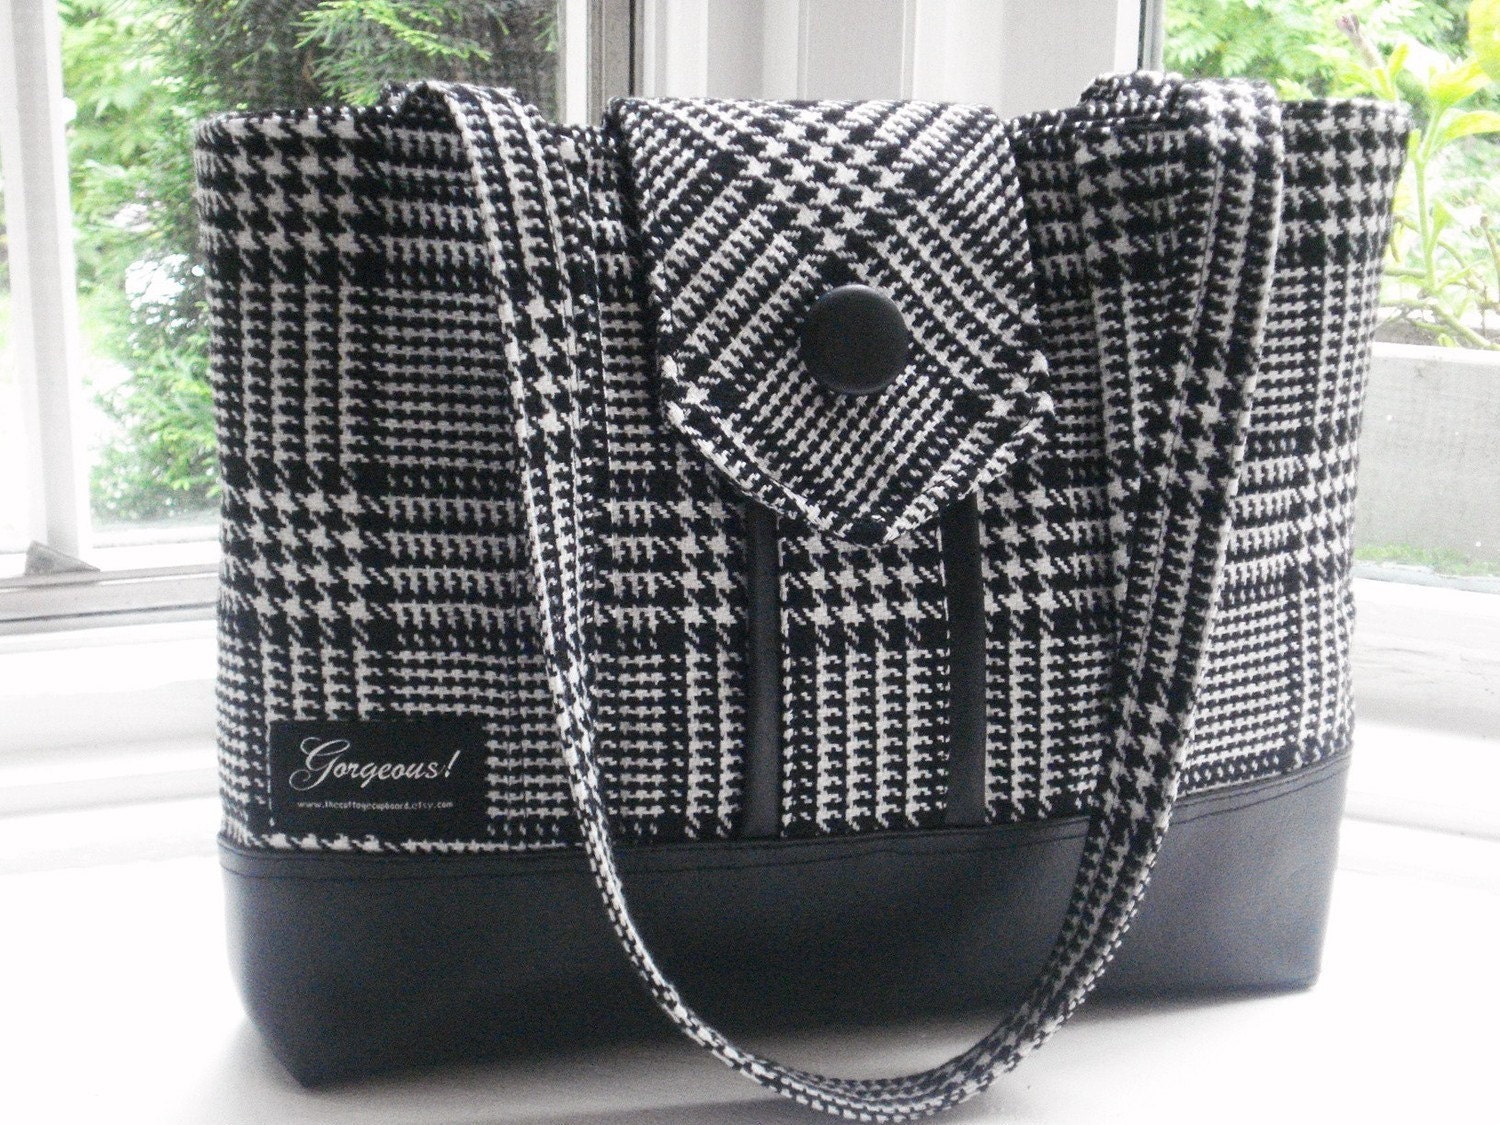 NEW...Everyday Gorgeous, Blk/whte wool Glen Check/leatherette shoulder bag,,,